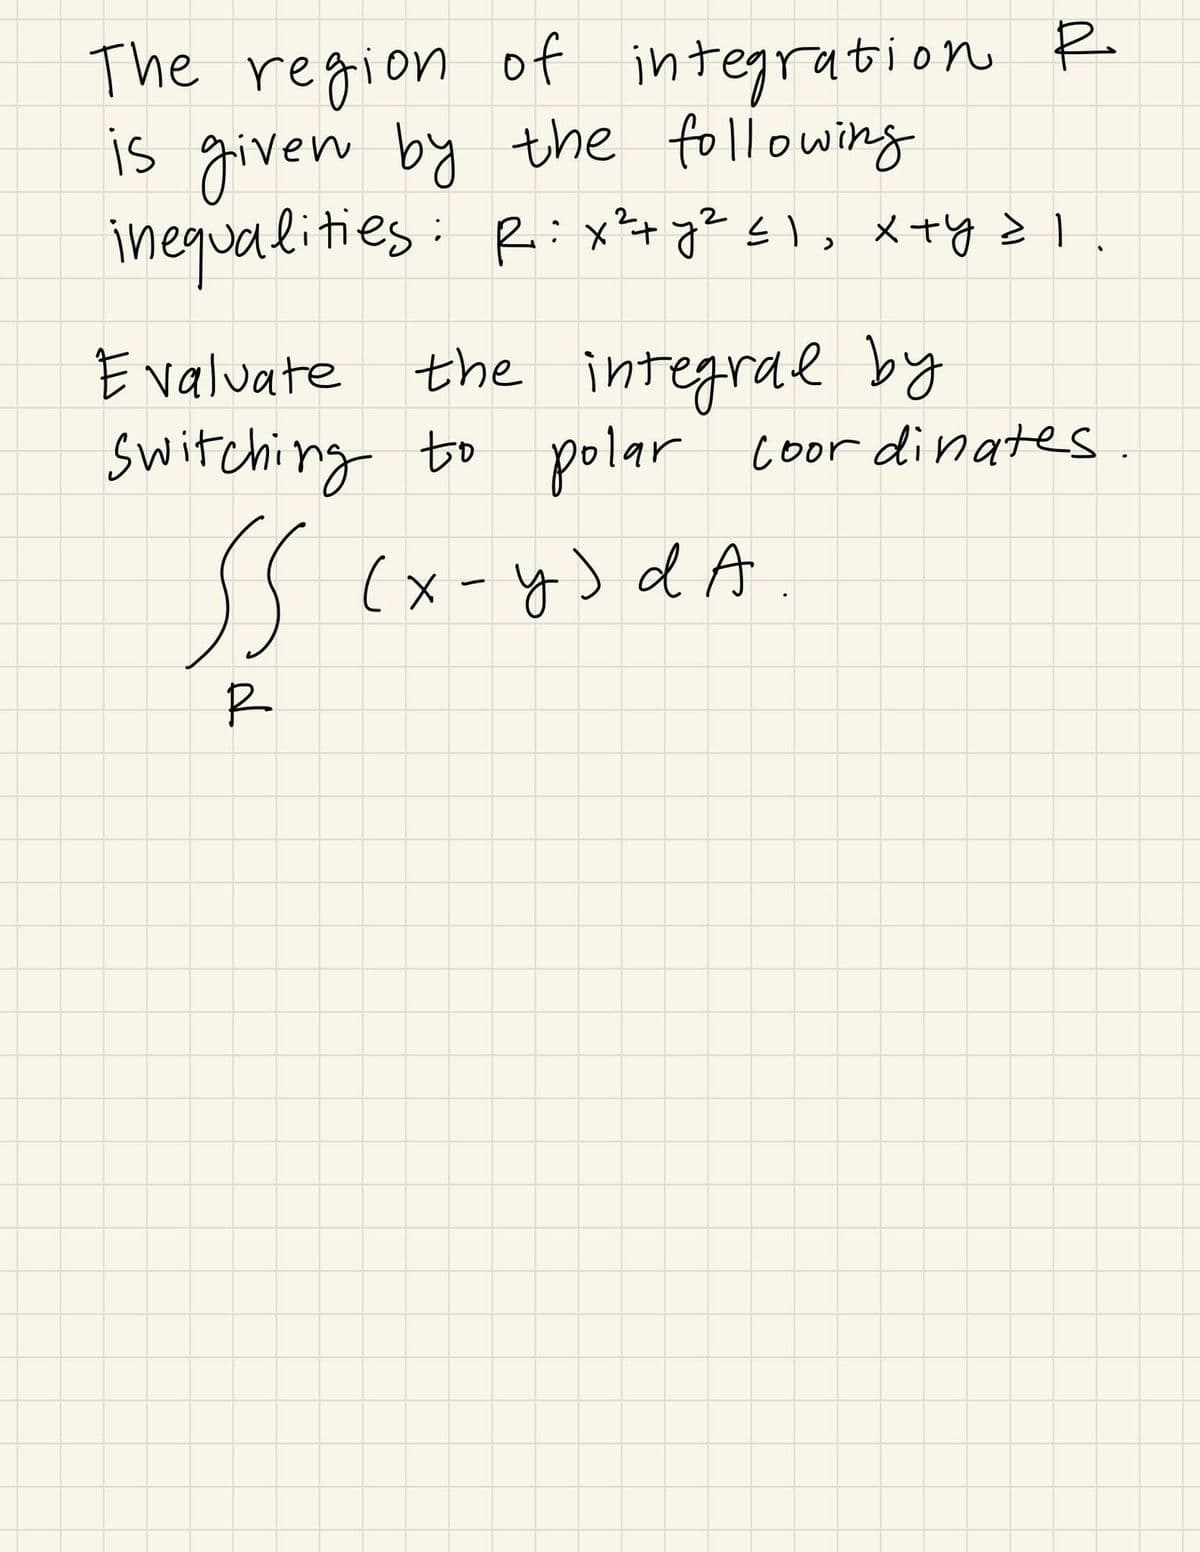 The region of integration R
is given by the following
inequalities: Ri:x*+a² s\, x+y z I
the integrae by
switching to polar toor dinates
Evaluate
.
S (x-ysdA
R
